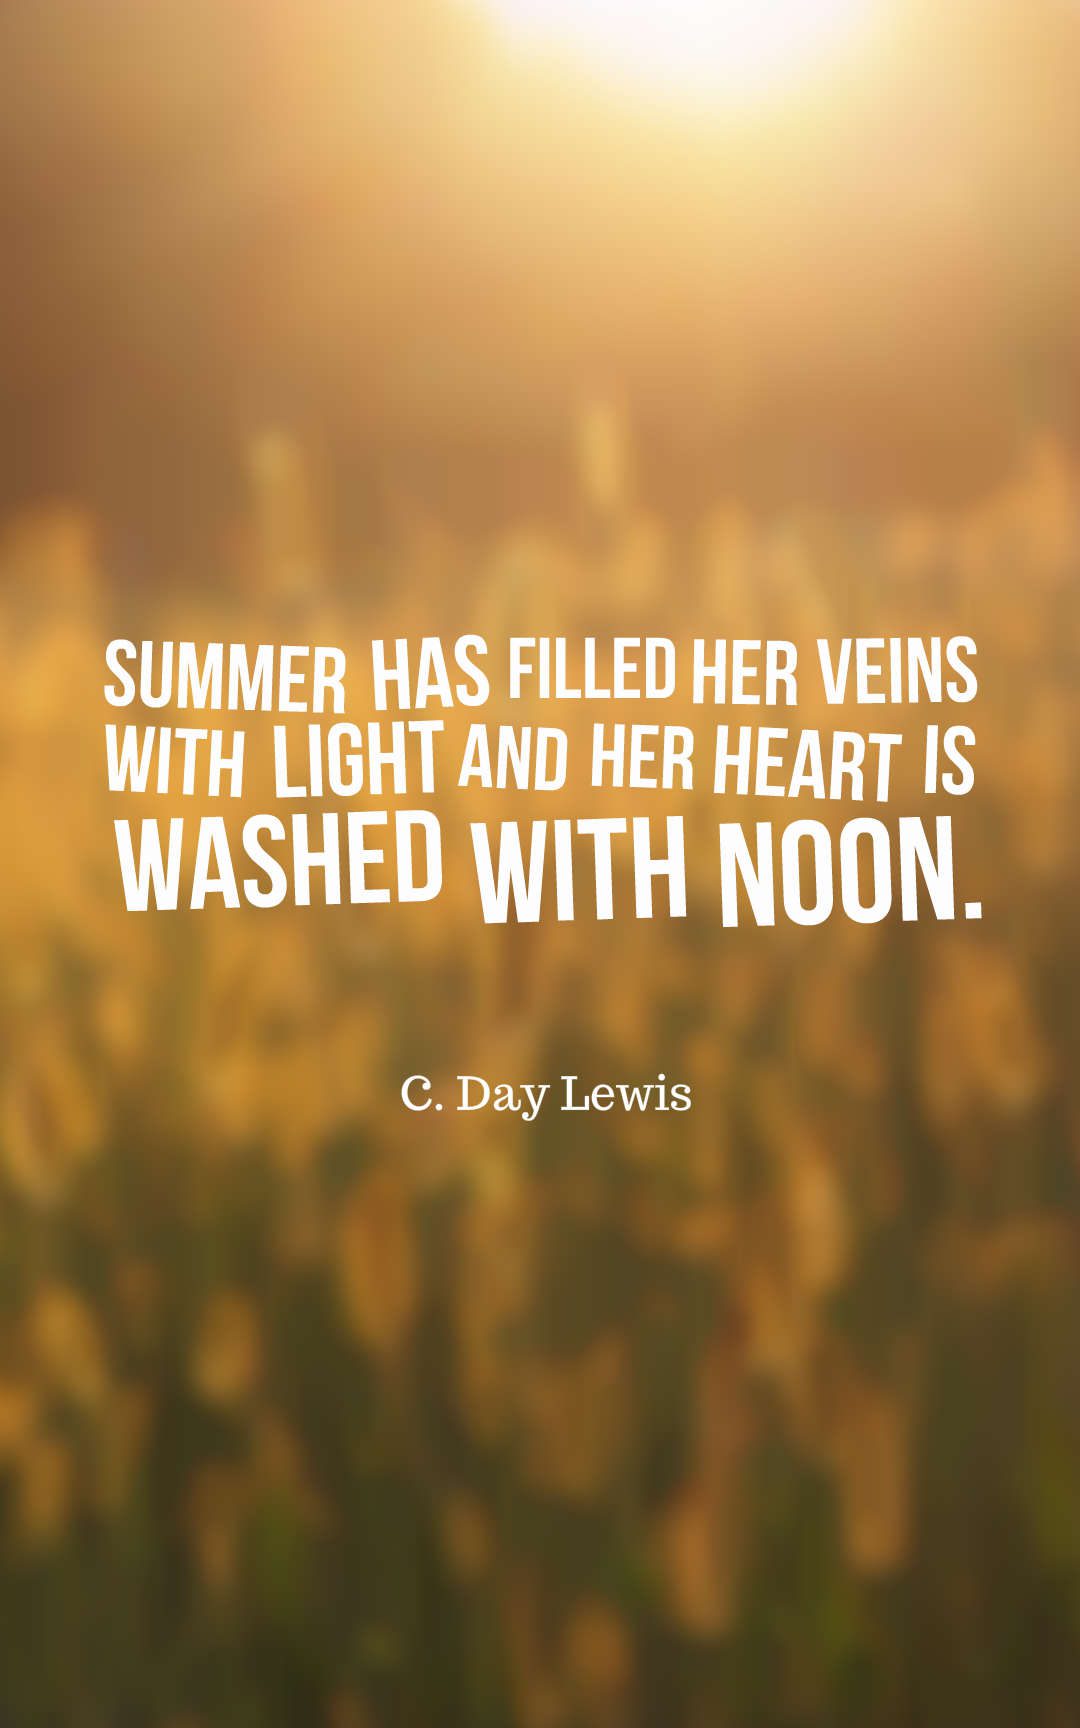 Short Summer Quotes: 45 Beautiful Quotes About Summer